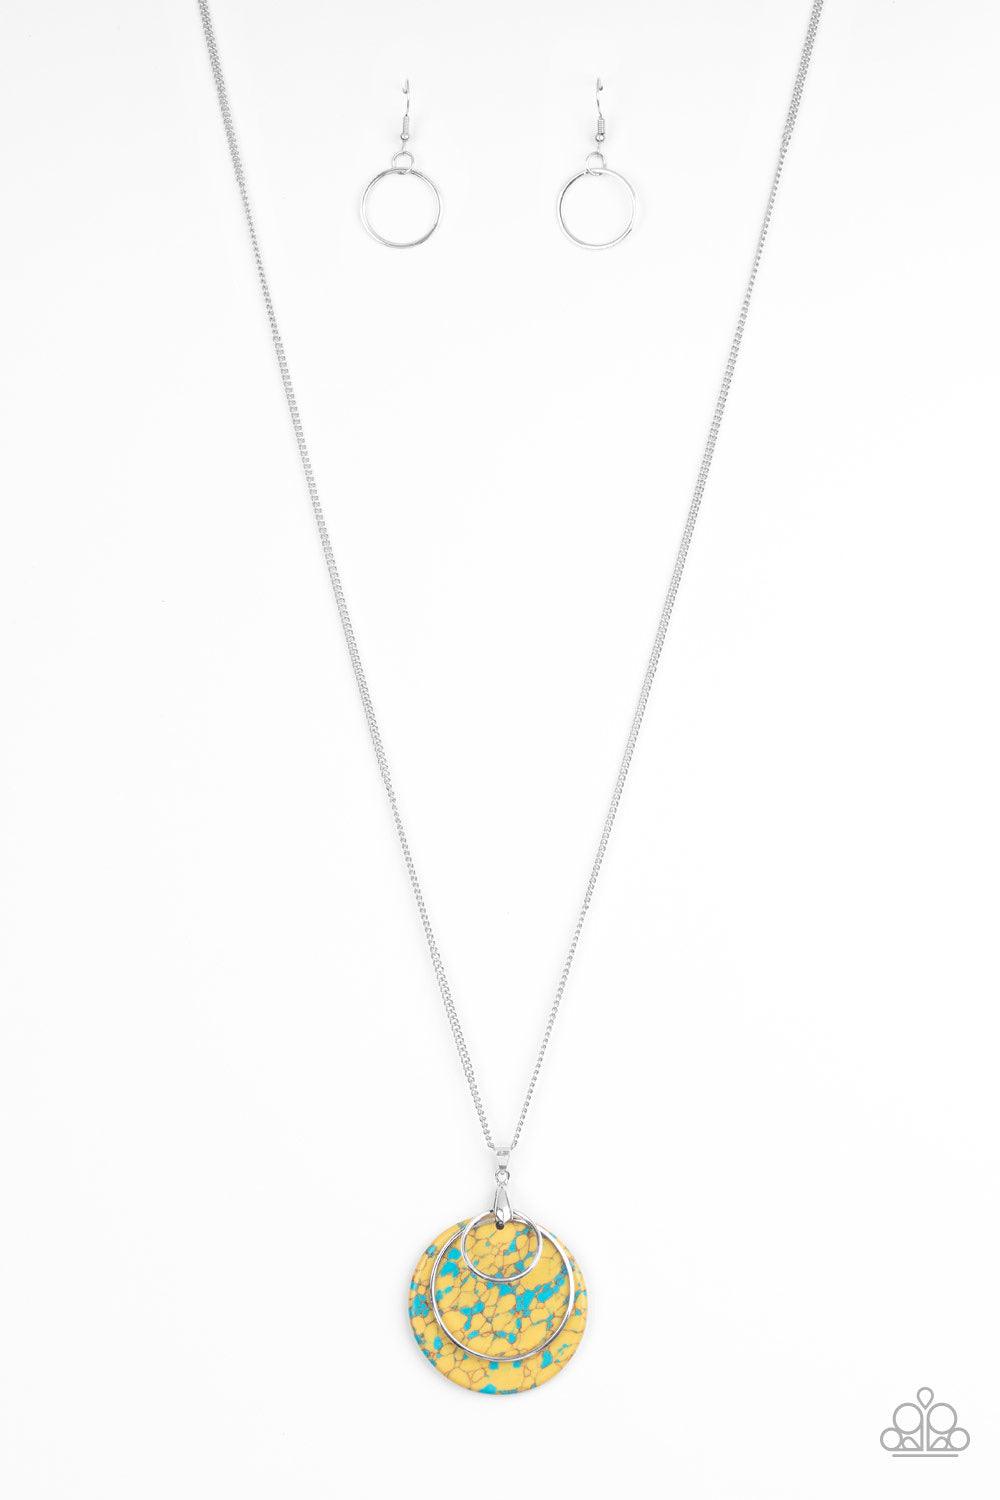 Paparazzi Accessories Sahara Equinox - Yellow Featuring a faux stone finish, an earthy yellow frame swings behind two shimmery silver rings at the bottom of a lengthened silver chain, creating a colorfully stacked pendant. Features an adjustable clasp clo